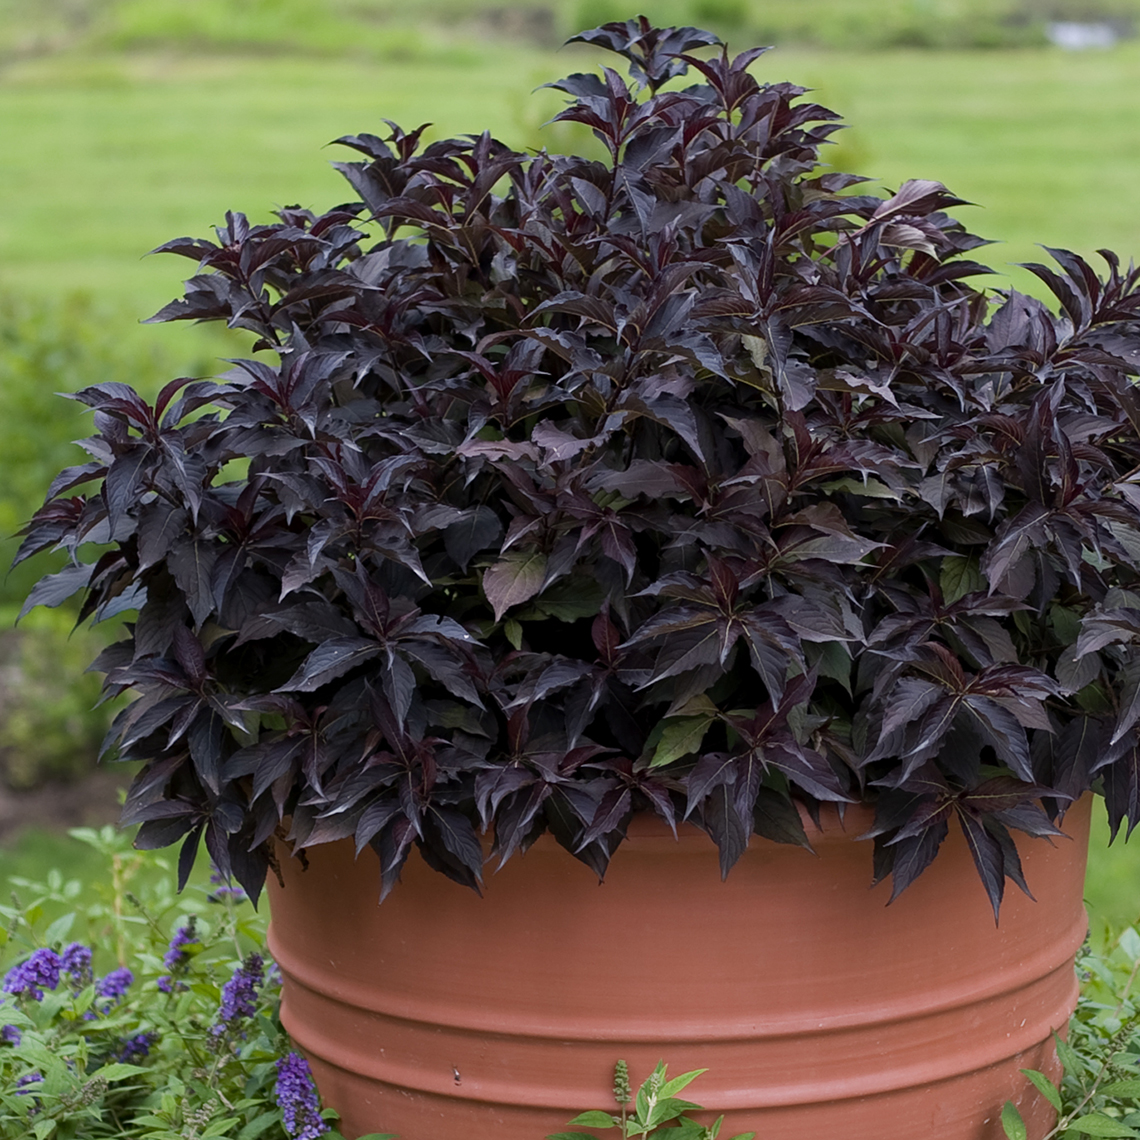 Spilled Wine weigela in a large decorative container showing its unique low spreading habit and very dark purple foliage